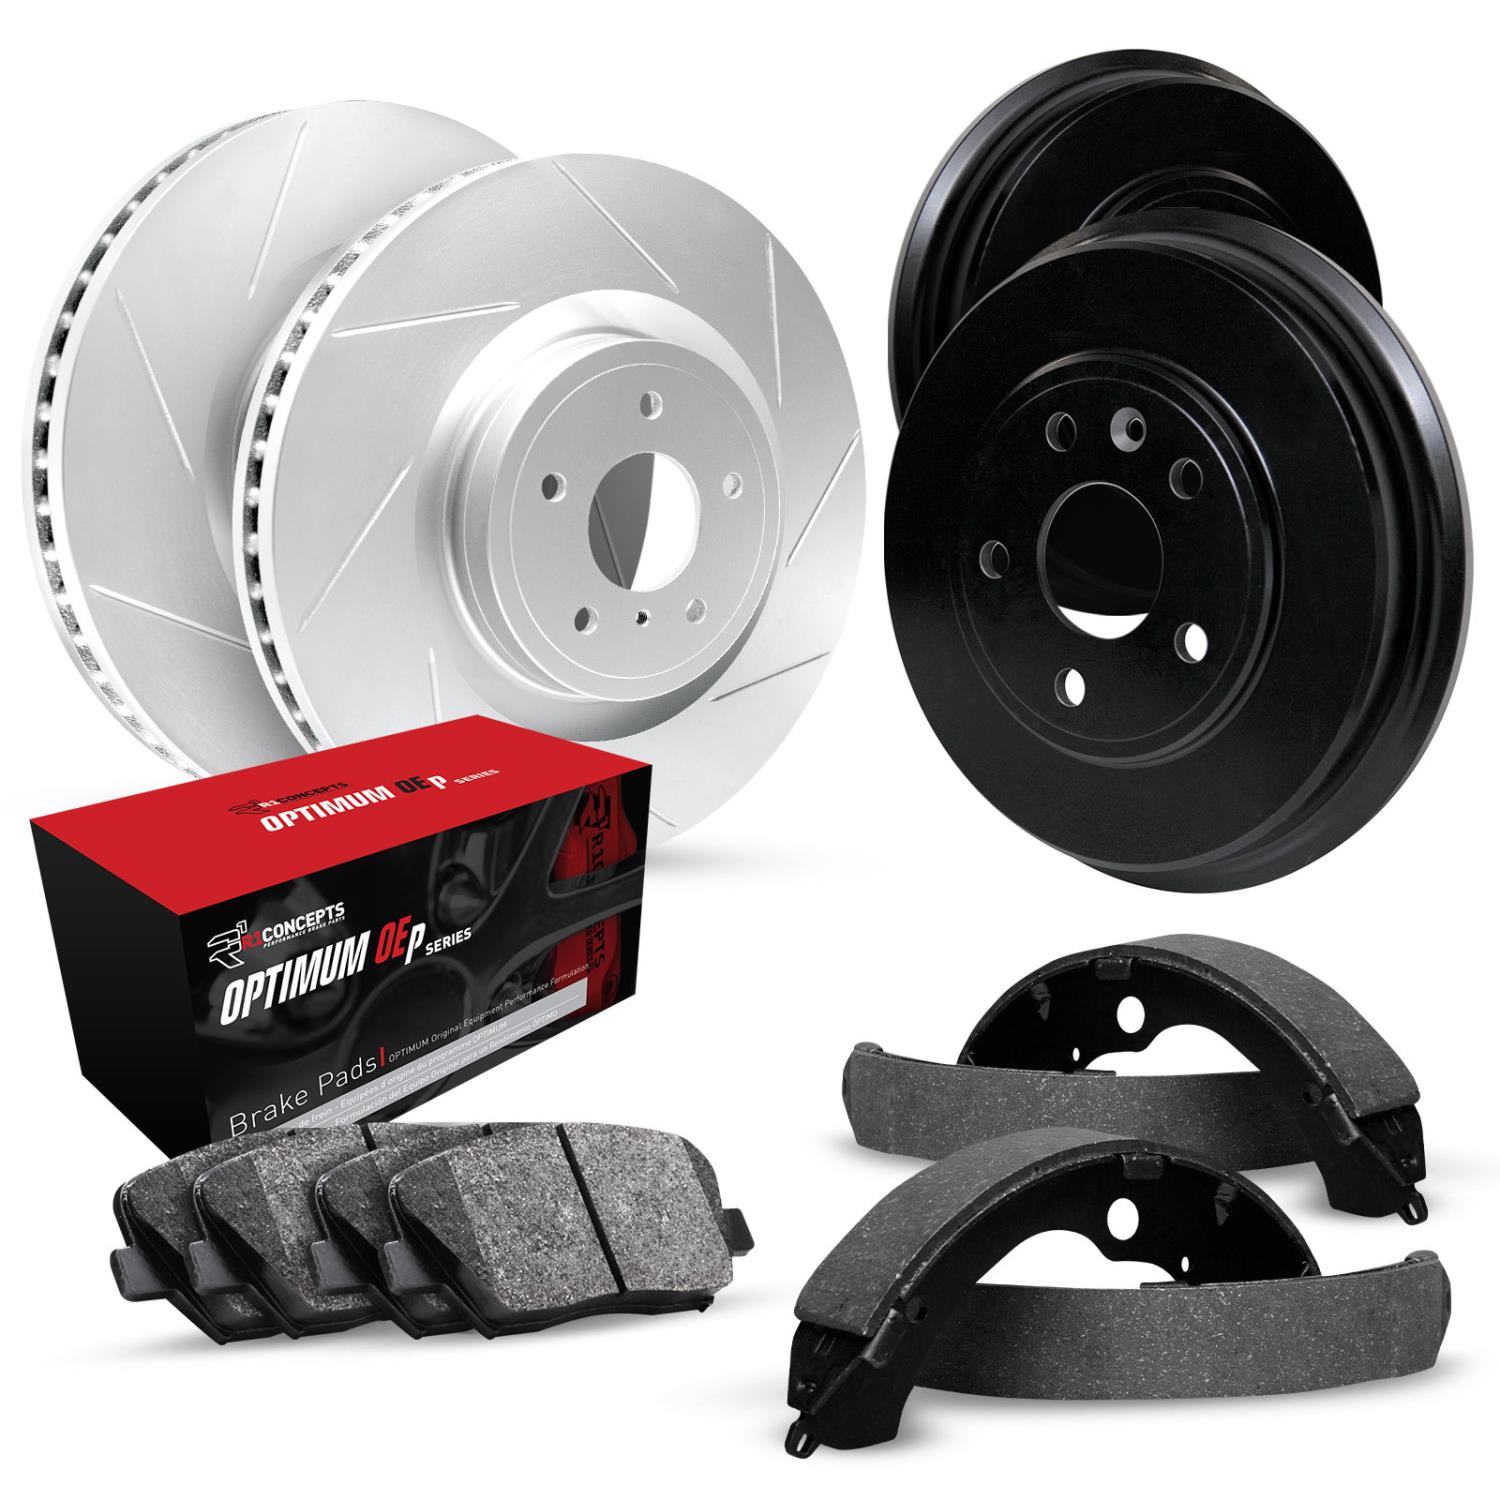 GEO-Carbon Slotted Brake Rotor & Drum Set w/Optimum OE Pads & Shoes, 1982-1992 GM, Position: Front & Rear